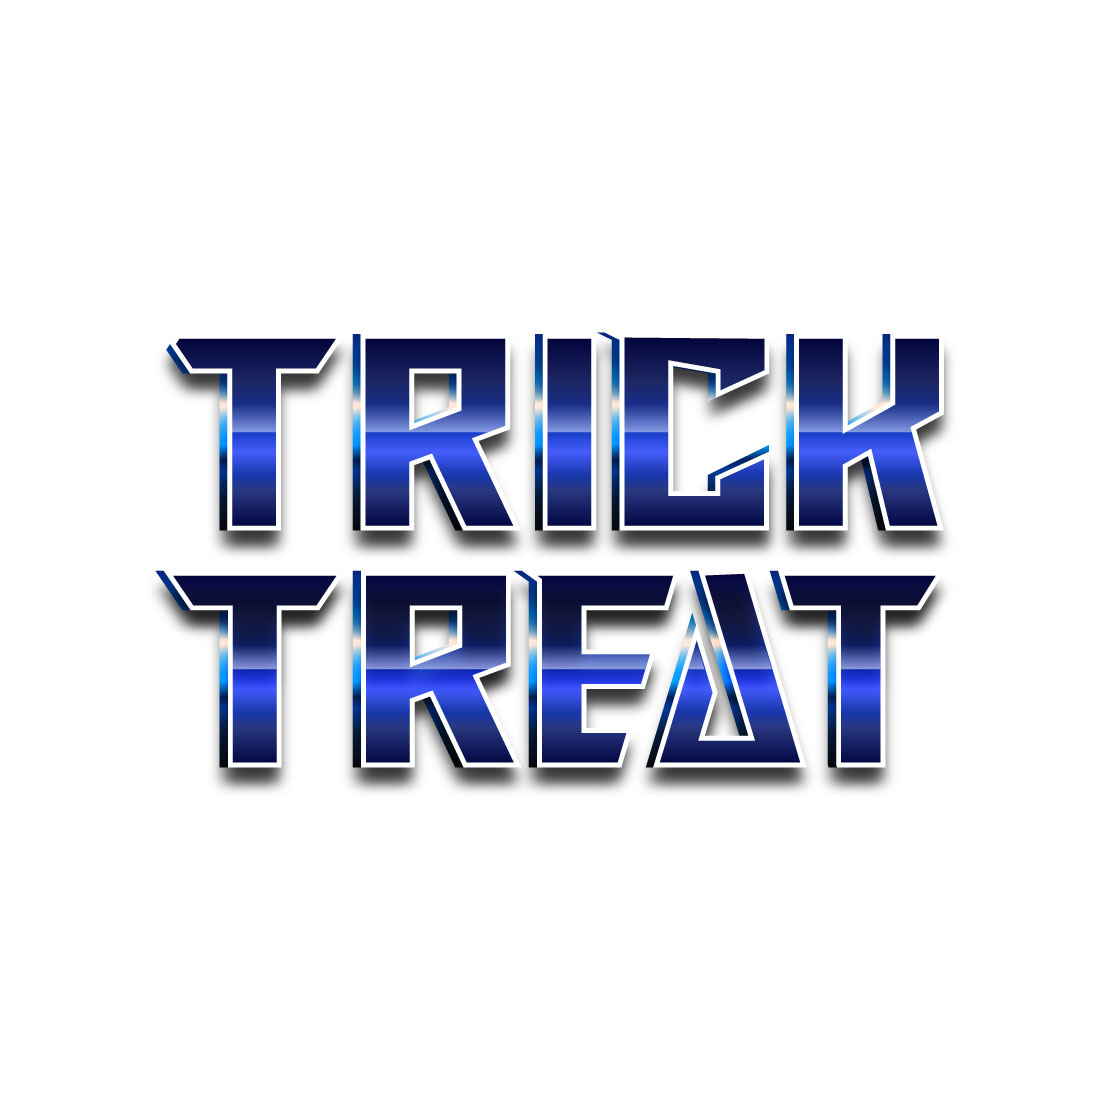 Beautiful Trick Treat 3D Logo Design - High-Res cover image.